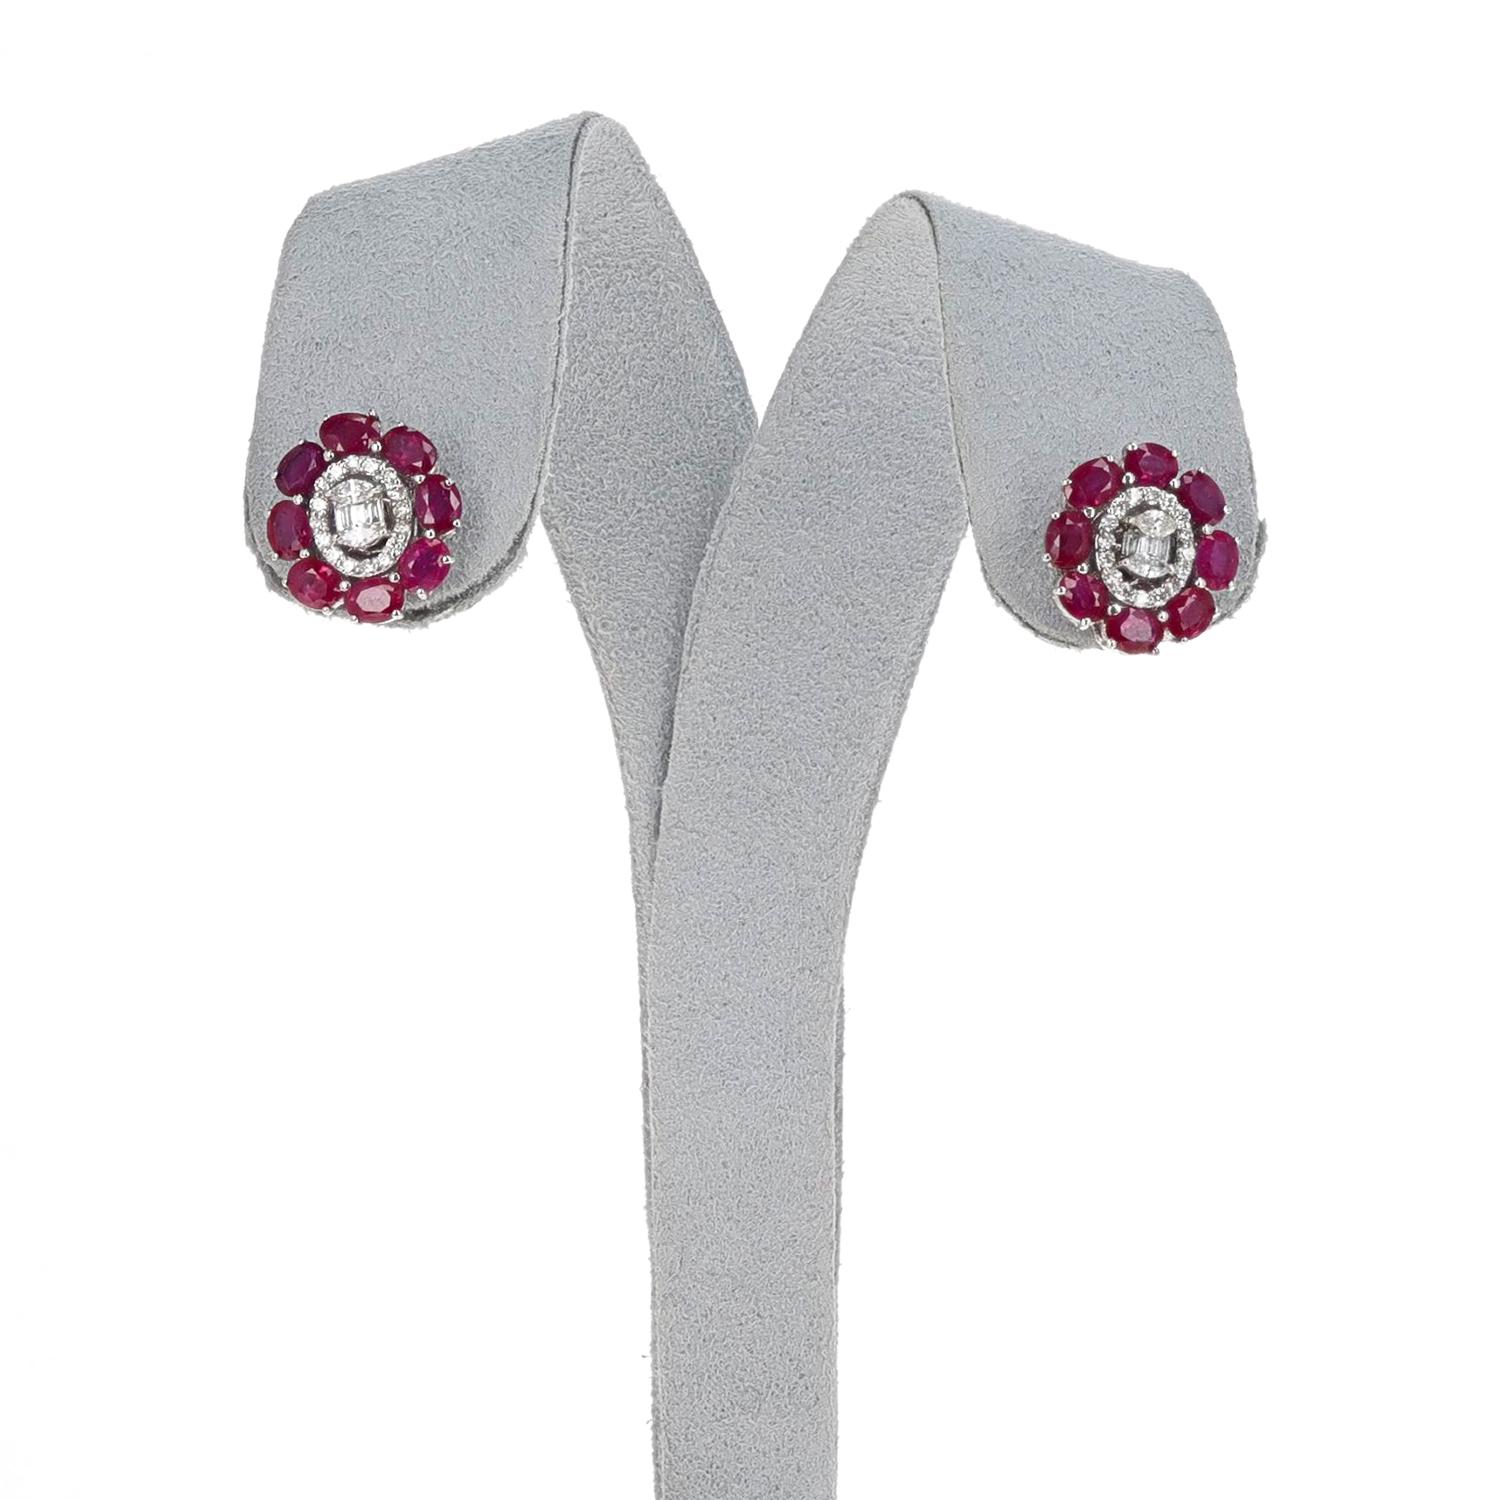 A pair of Oval Ruby and Diamond Stud Earrings made in18k White Gold. The rubies weigh 3.64 carats and the diamonds weigh 0.45 carats. The earrings weigh 6.14 grams. The dimensions are 0.55